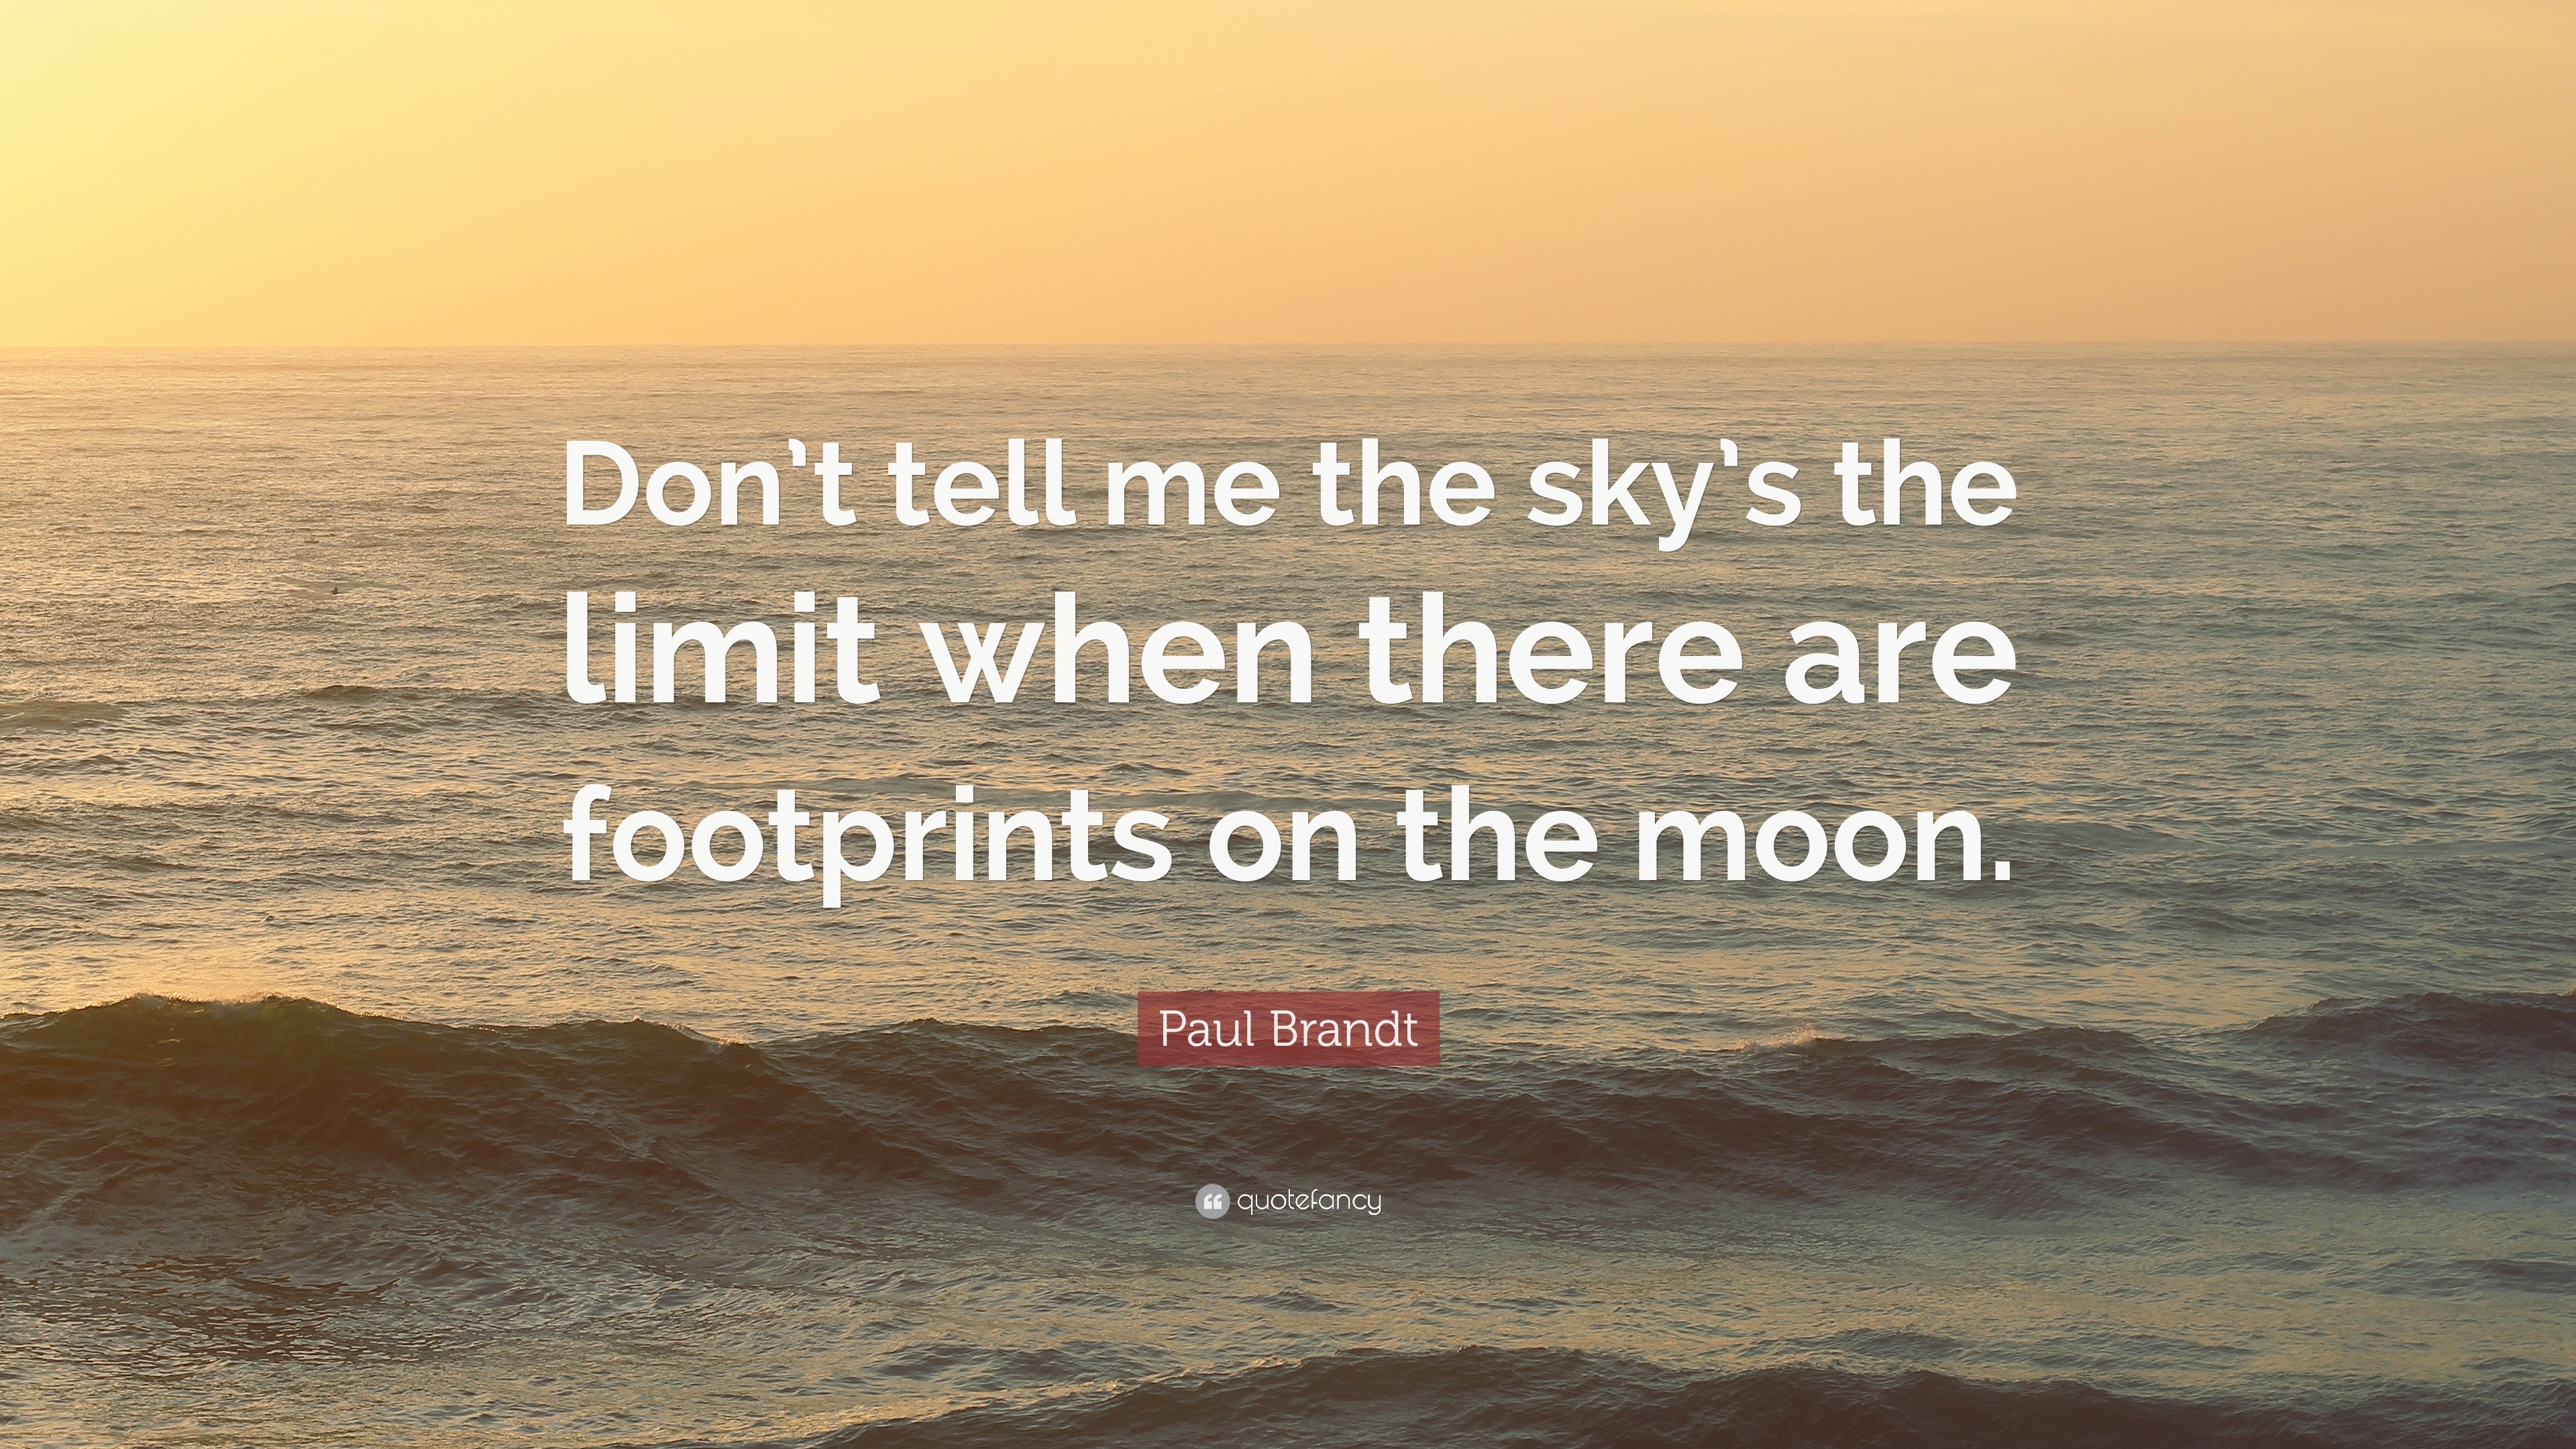 Paul Brandt Quote “Don’t tell me the sky’s the limit when